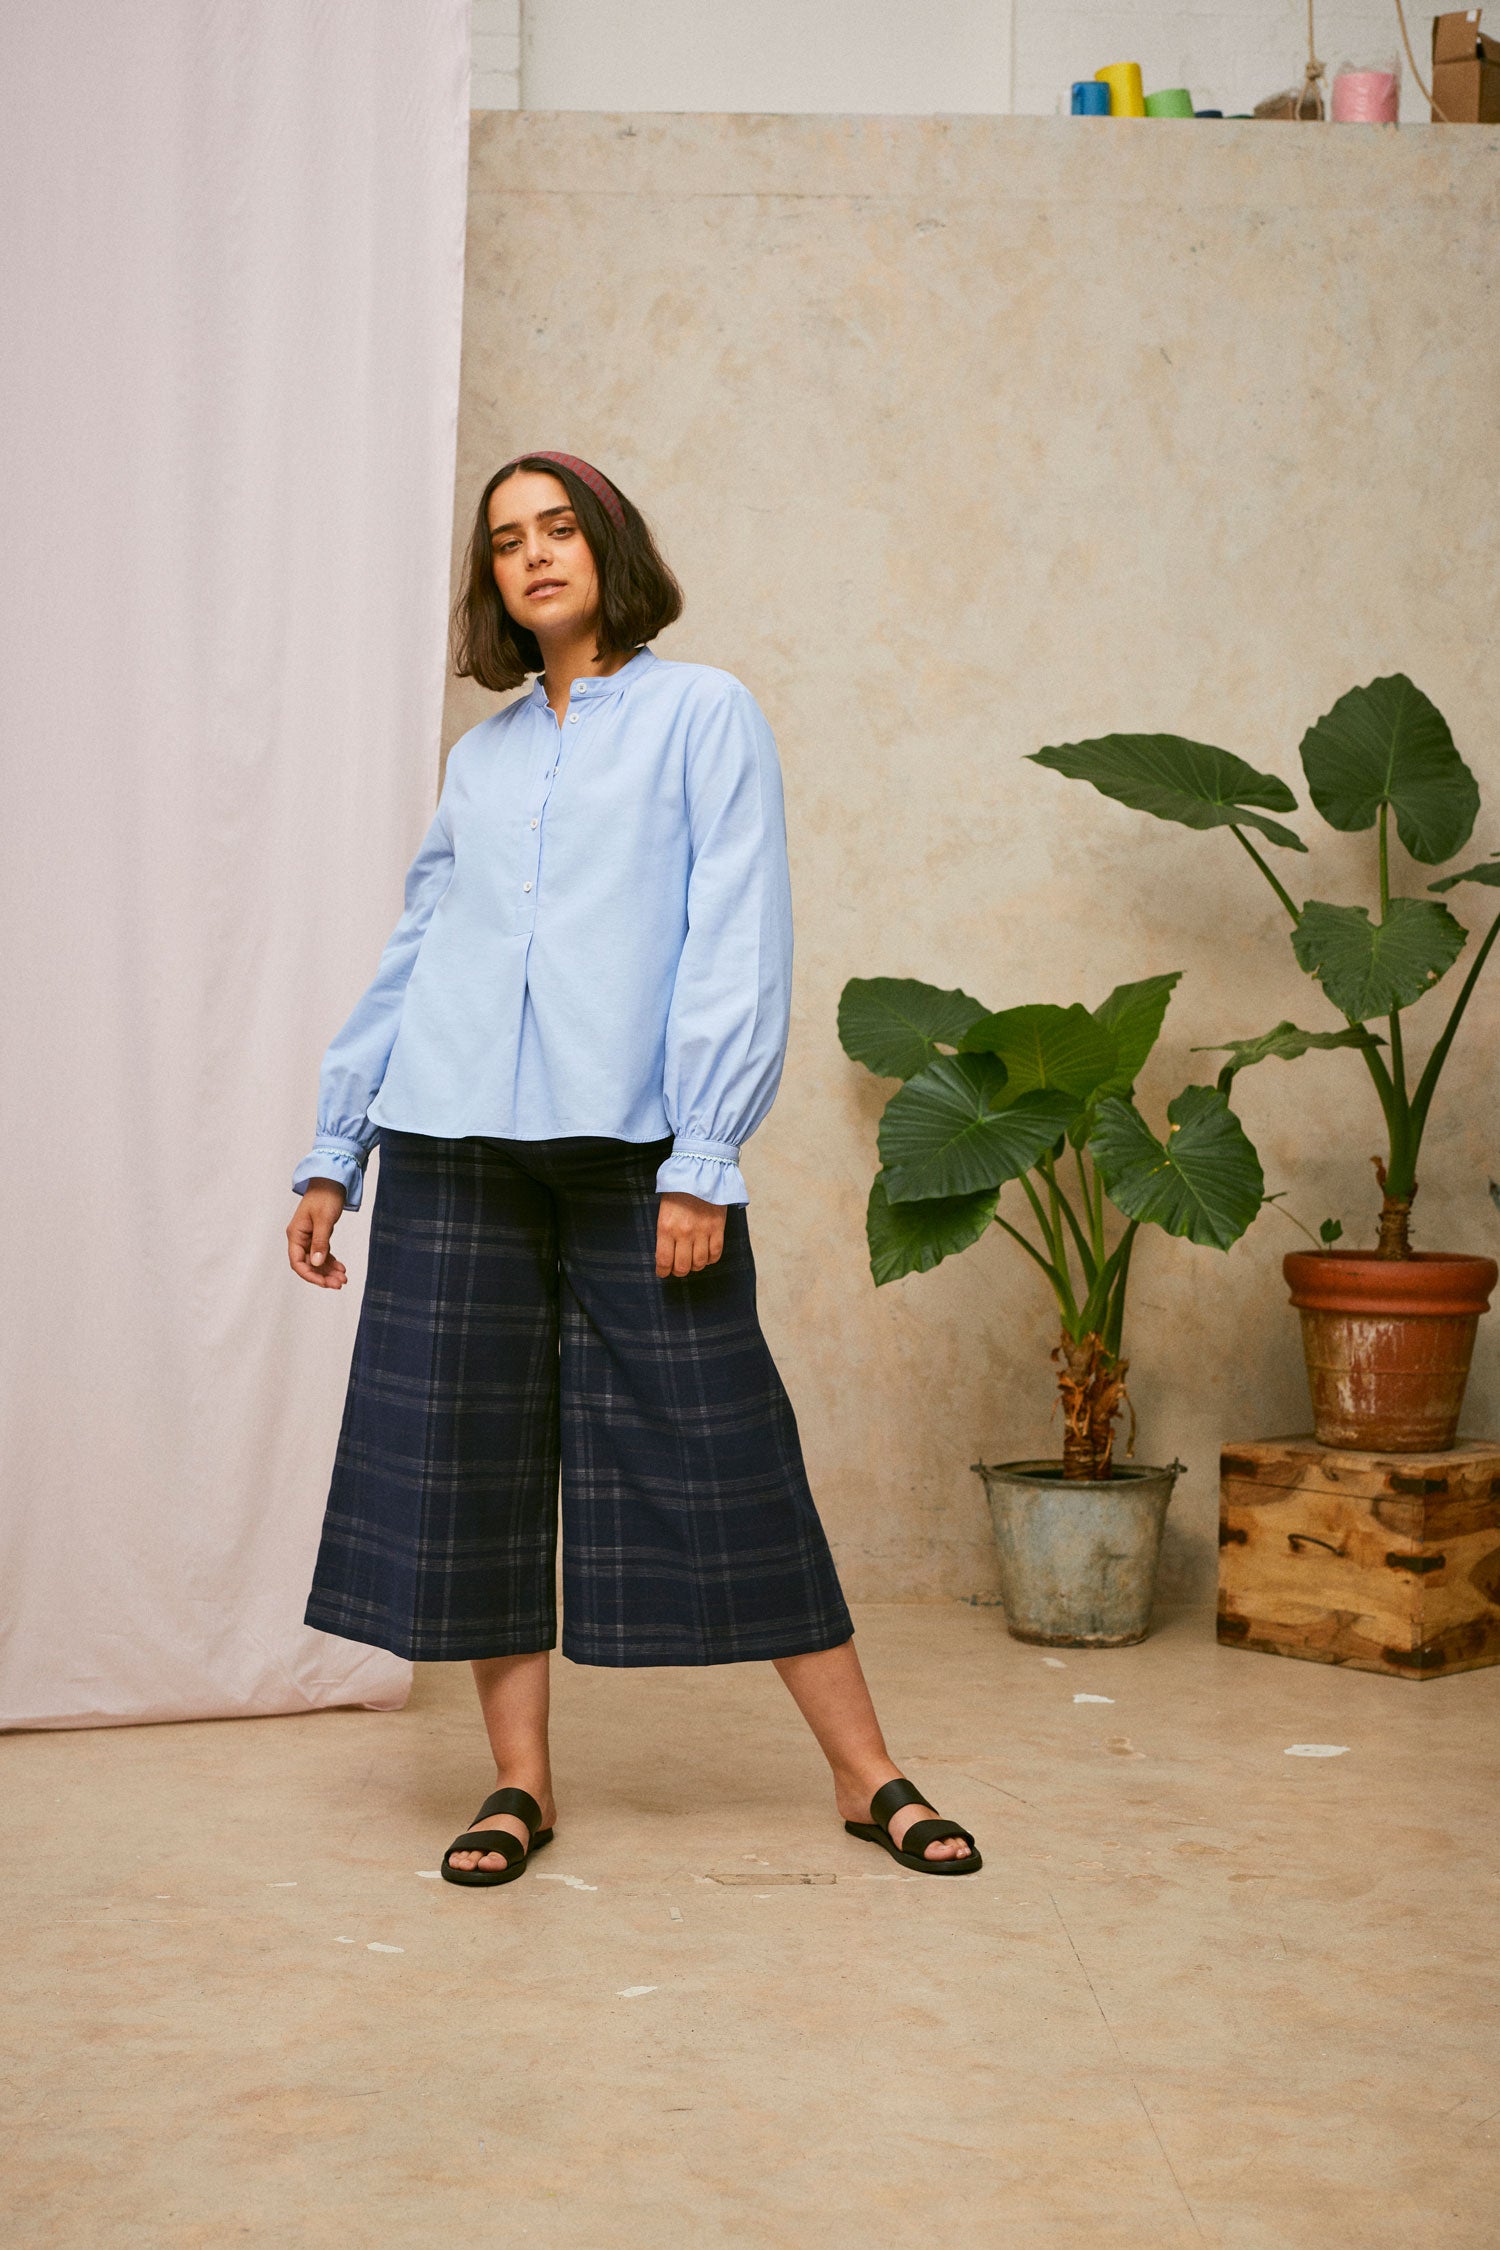 Full length shot of model wearing Saywood's Amelia check trousers, wide leg culotte shape in navy check, with black sandals. Worn with the pale blue shirt, the Marie a-line blouse. A plant and drop of pink fabric can be seen in the background.